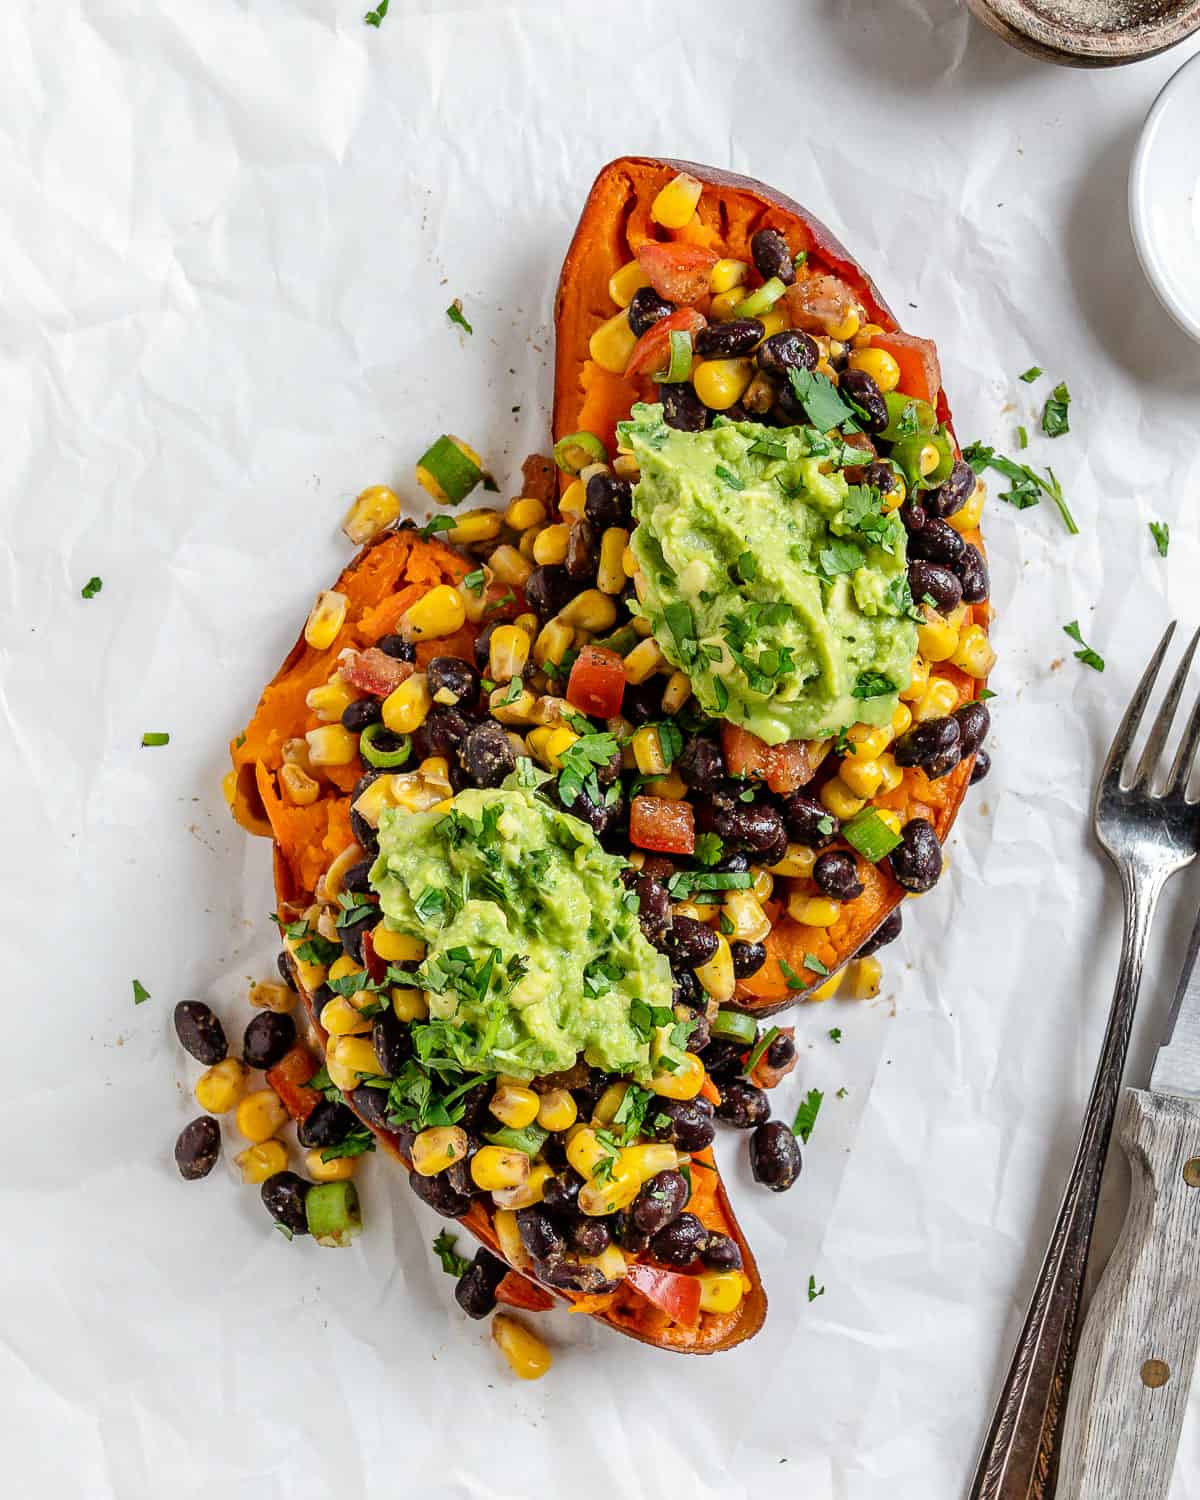 completed Southwest Stuffed Sweet Potatoes against a white surface